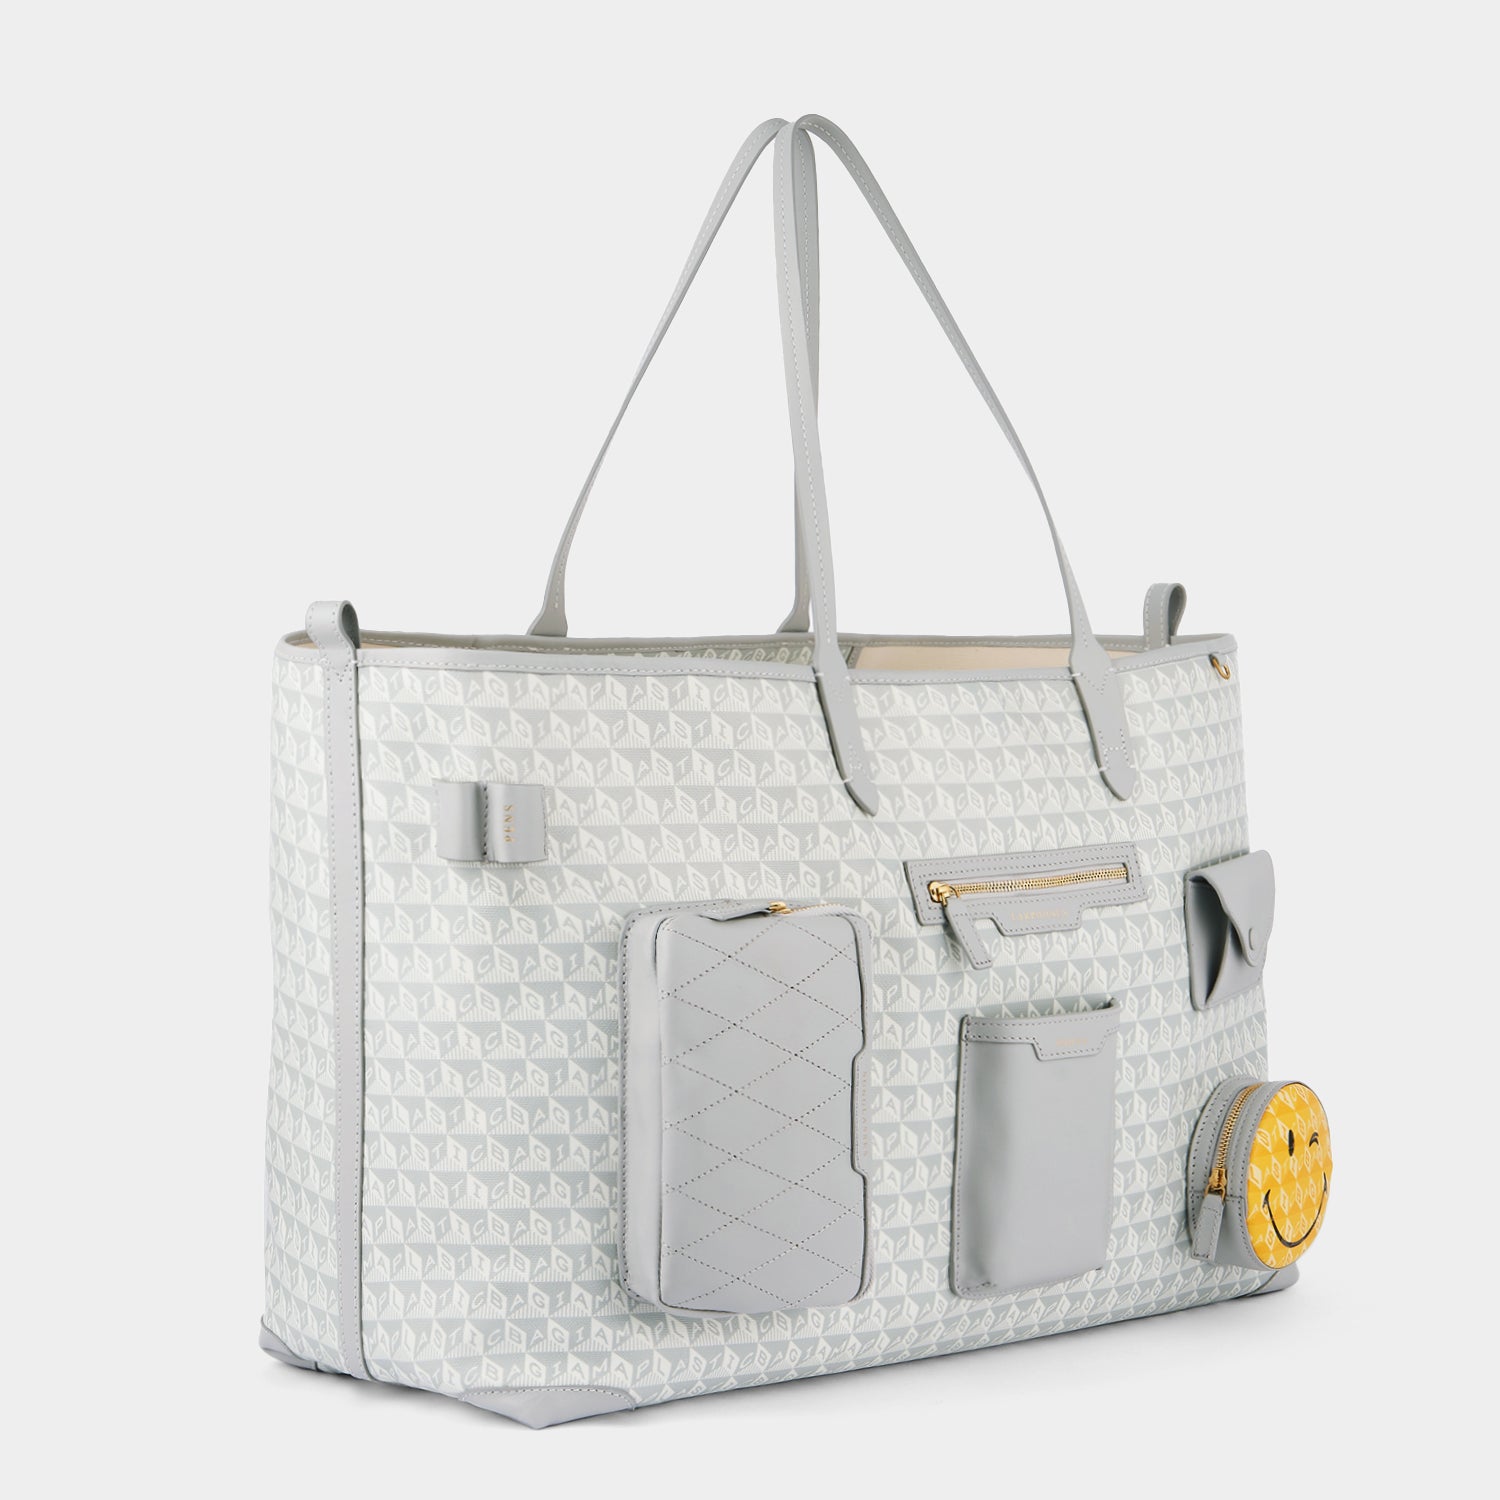 I am a Plastic Bag Wink XL Tote -

                  
                    Recycled Canvas in Frost -
                  

                  Anya Hindmarch US
